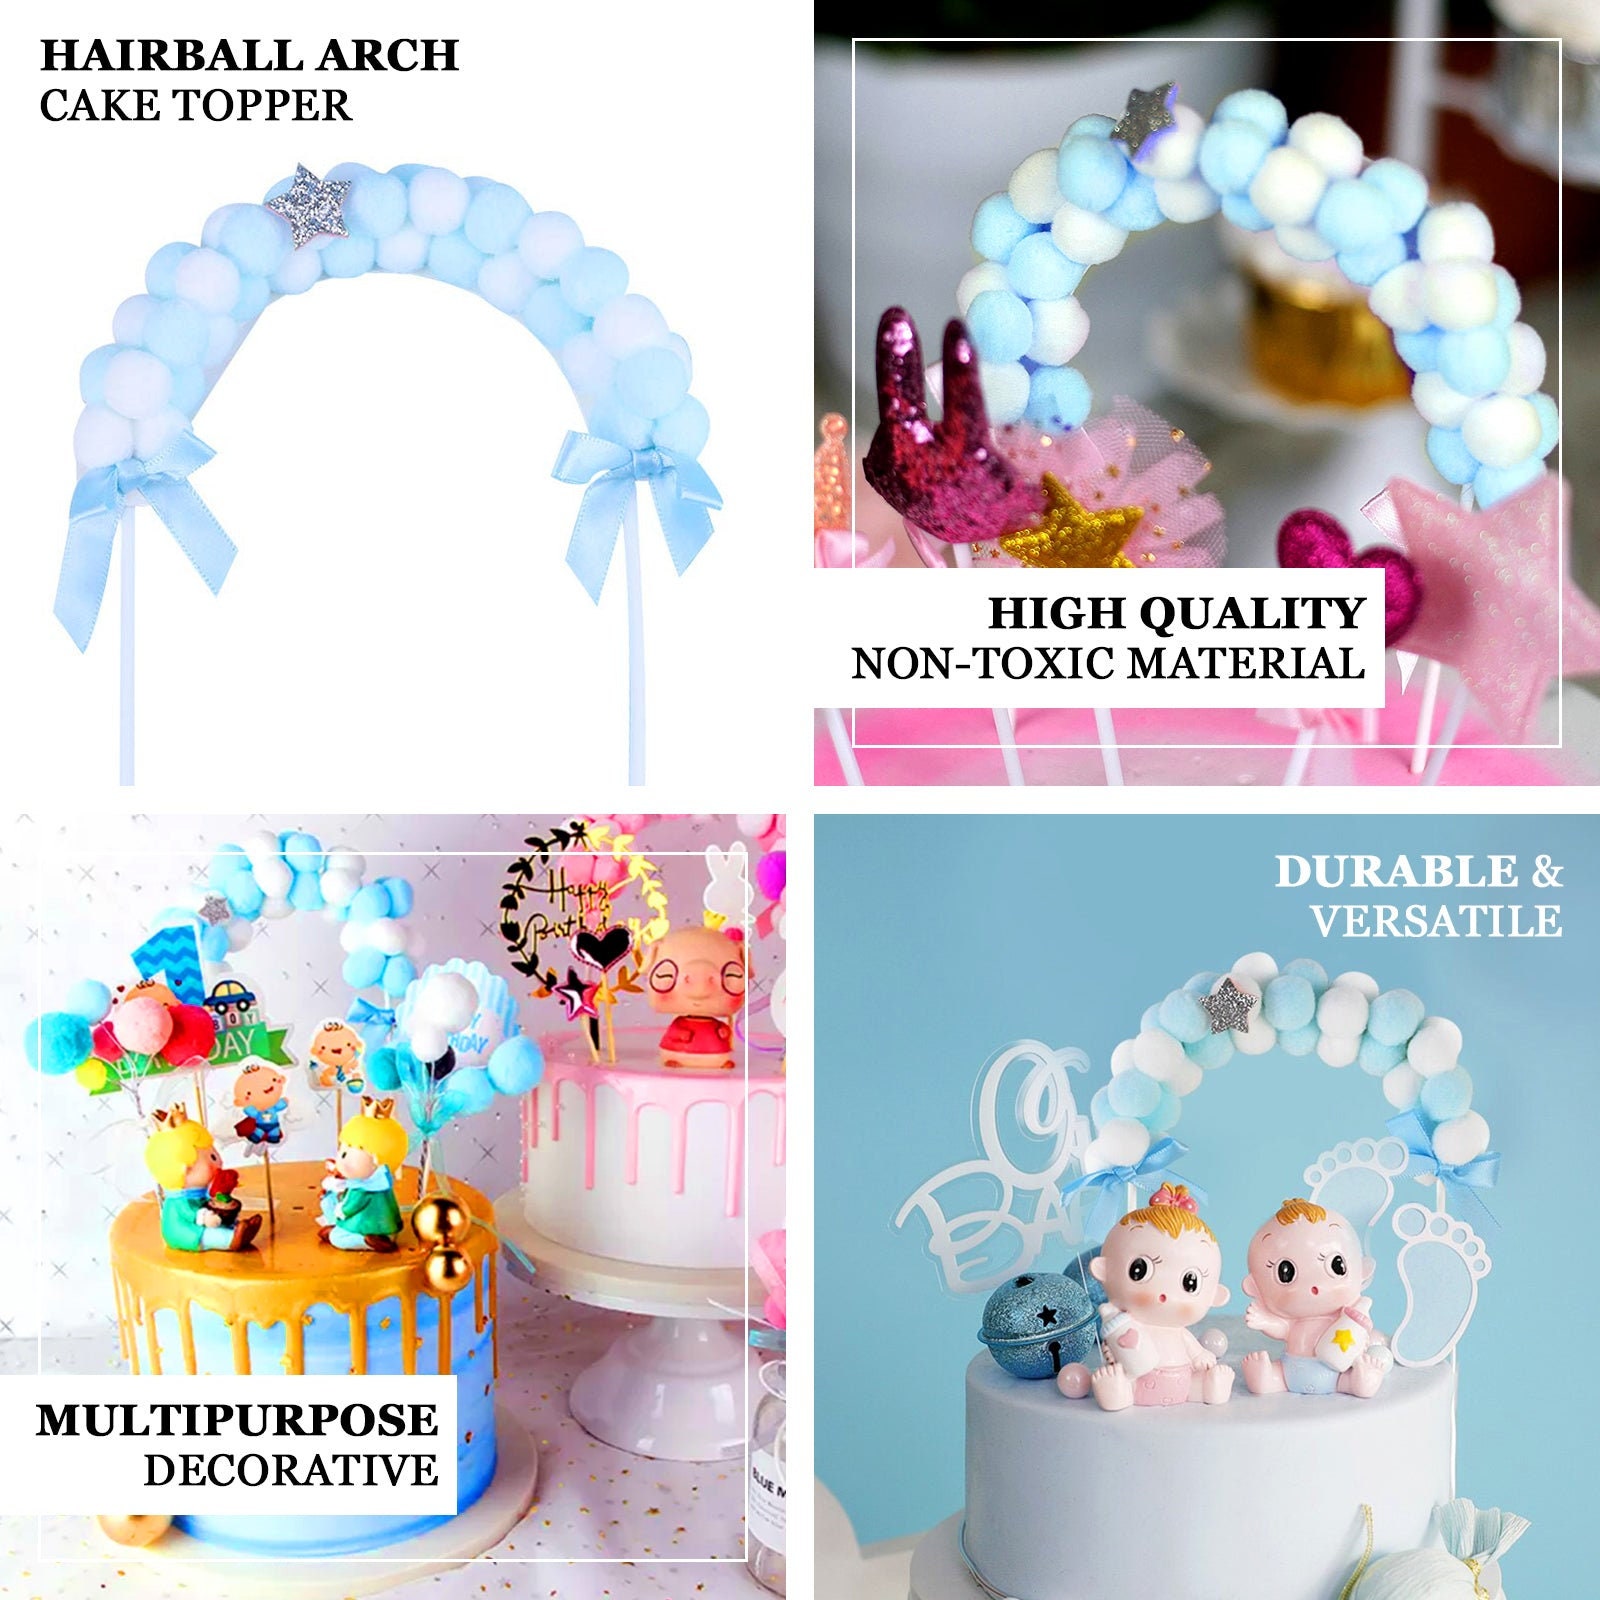 BalsaCircle 6 x 11 White Pink Cotton Balls Arch Cake Topper Wedding Party  Accessories Decorations